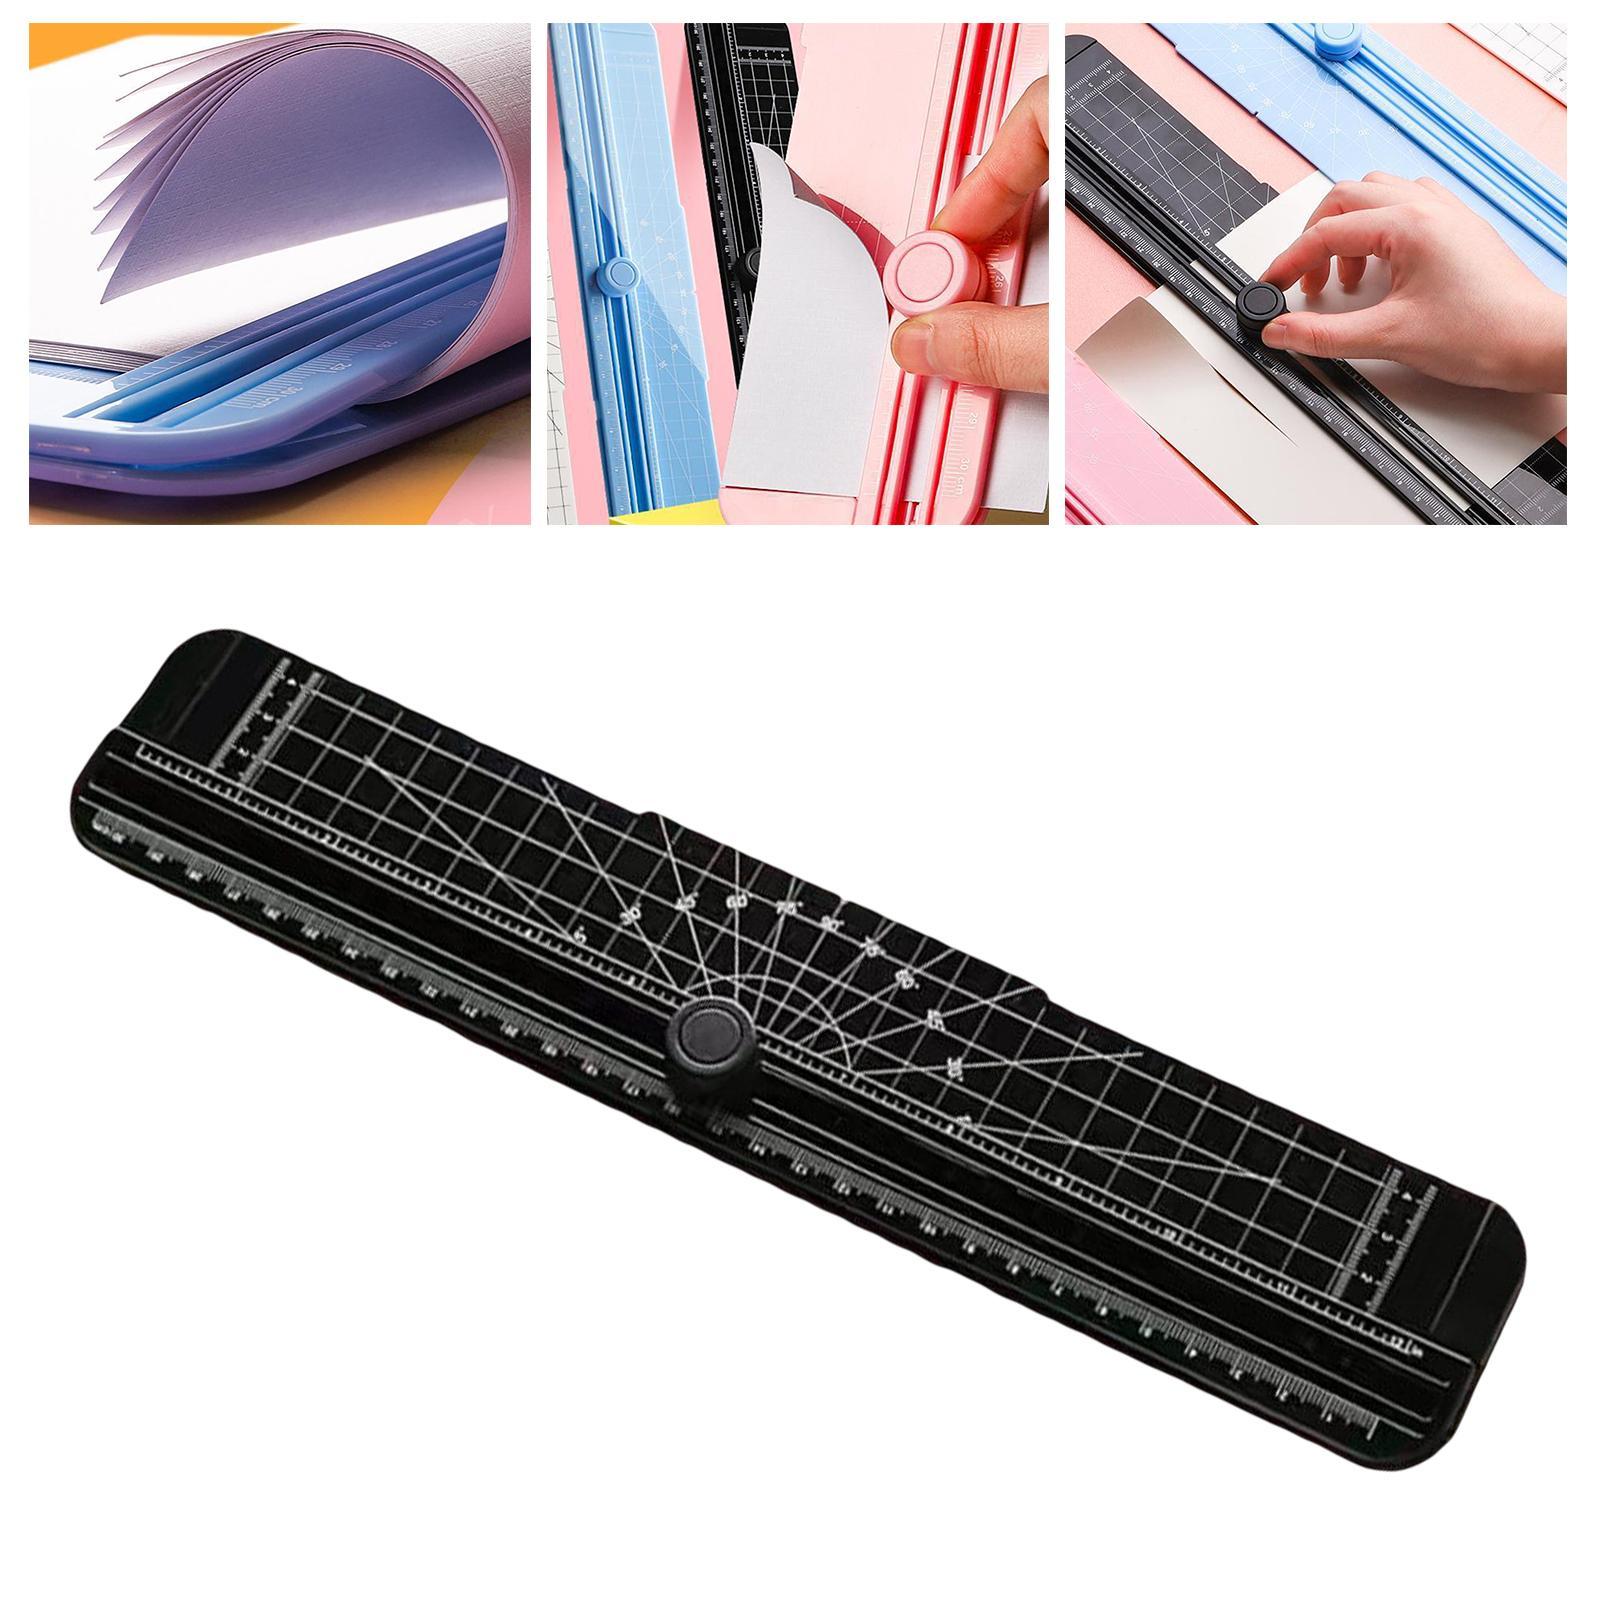 Paper Cutter Slicer Precision Durable for DIY Greeting Cards